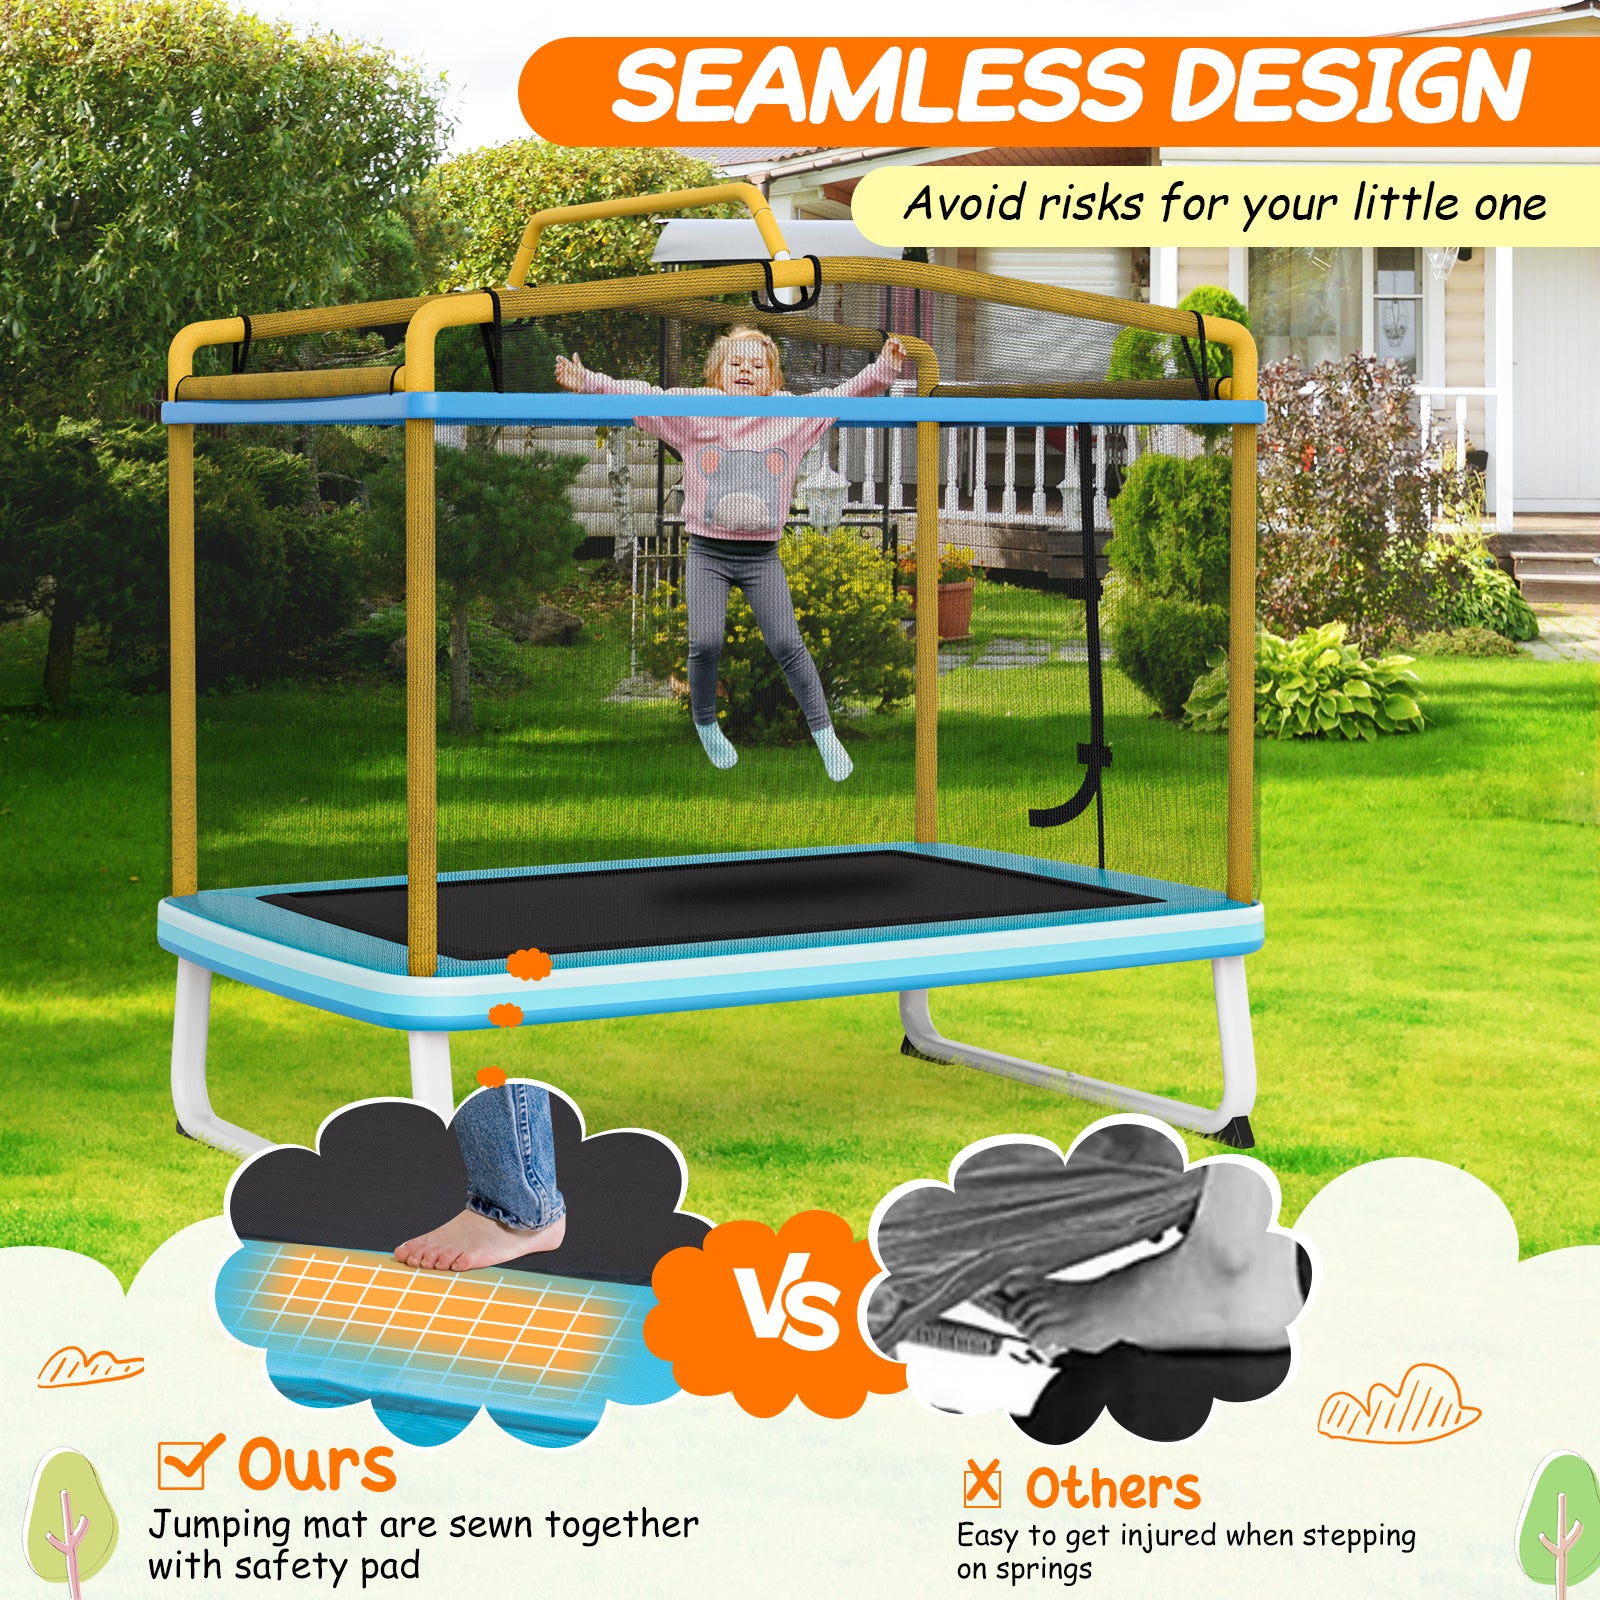 190CM 3-in-1 Kids Rectangle Trampoline with Enclosure Net and Horizontal Bar-Yellow